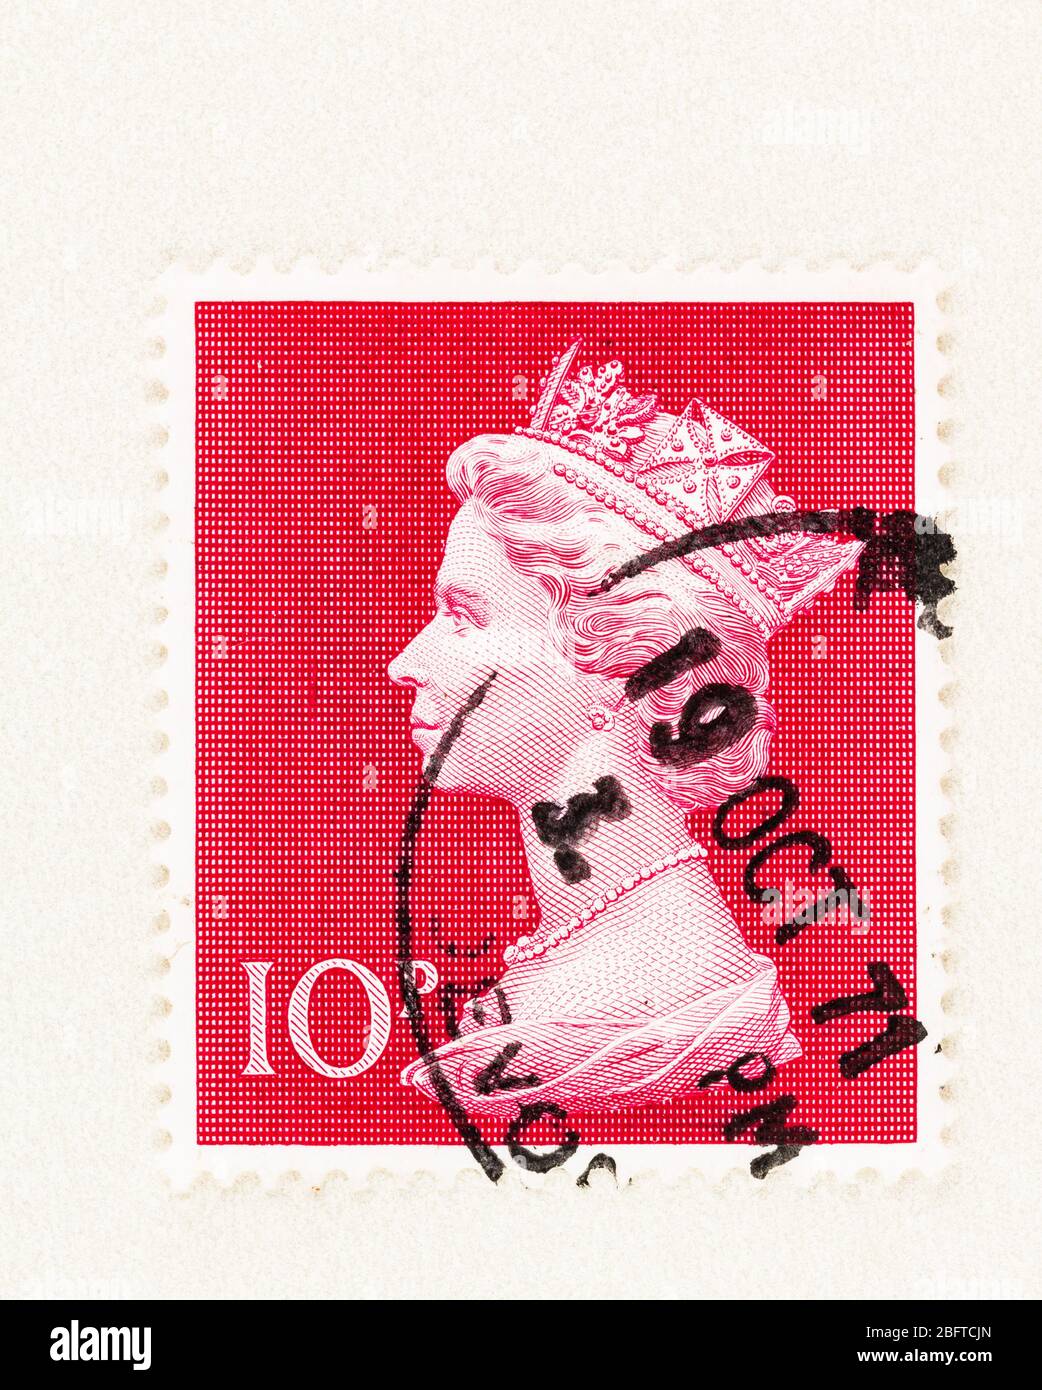 SEATTLE WASHINGTON - April 18, 2020: Close up of cerise red Large Machin 1970 Stamp of Great Britain, featuring 10 penny Queen Elizabeth II bust in pr Stock Photo